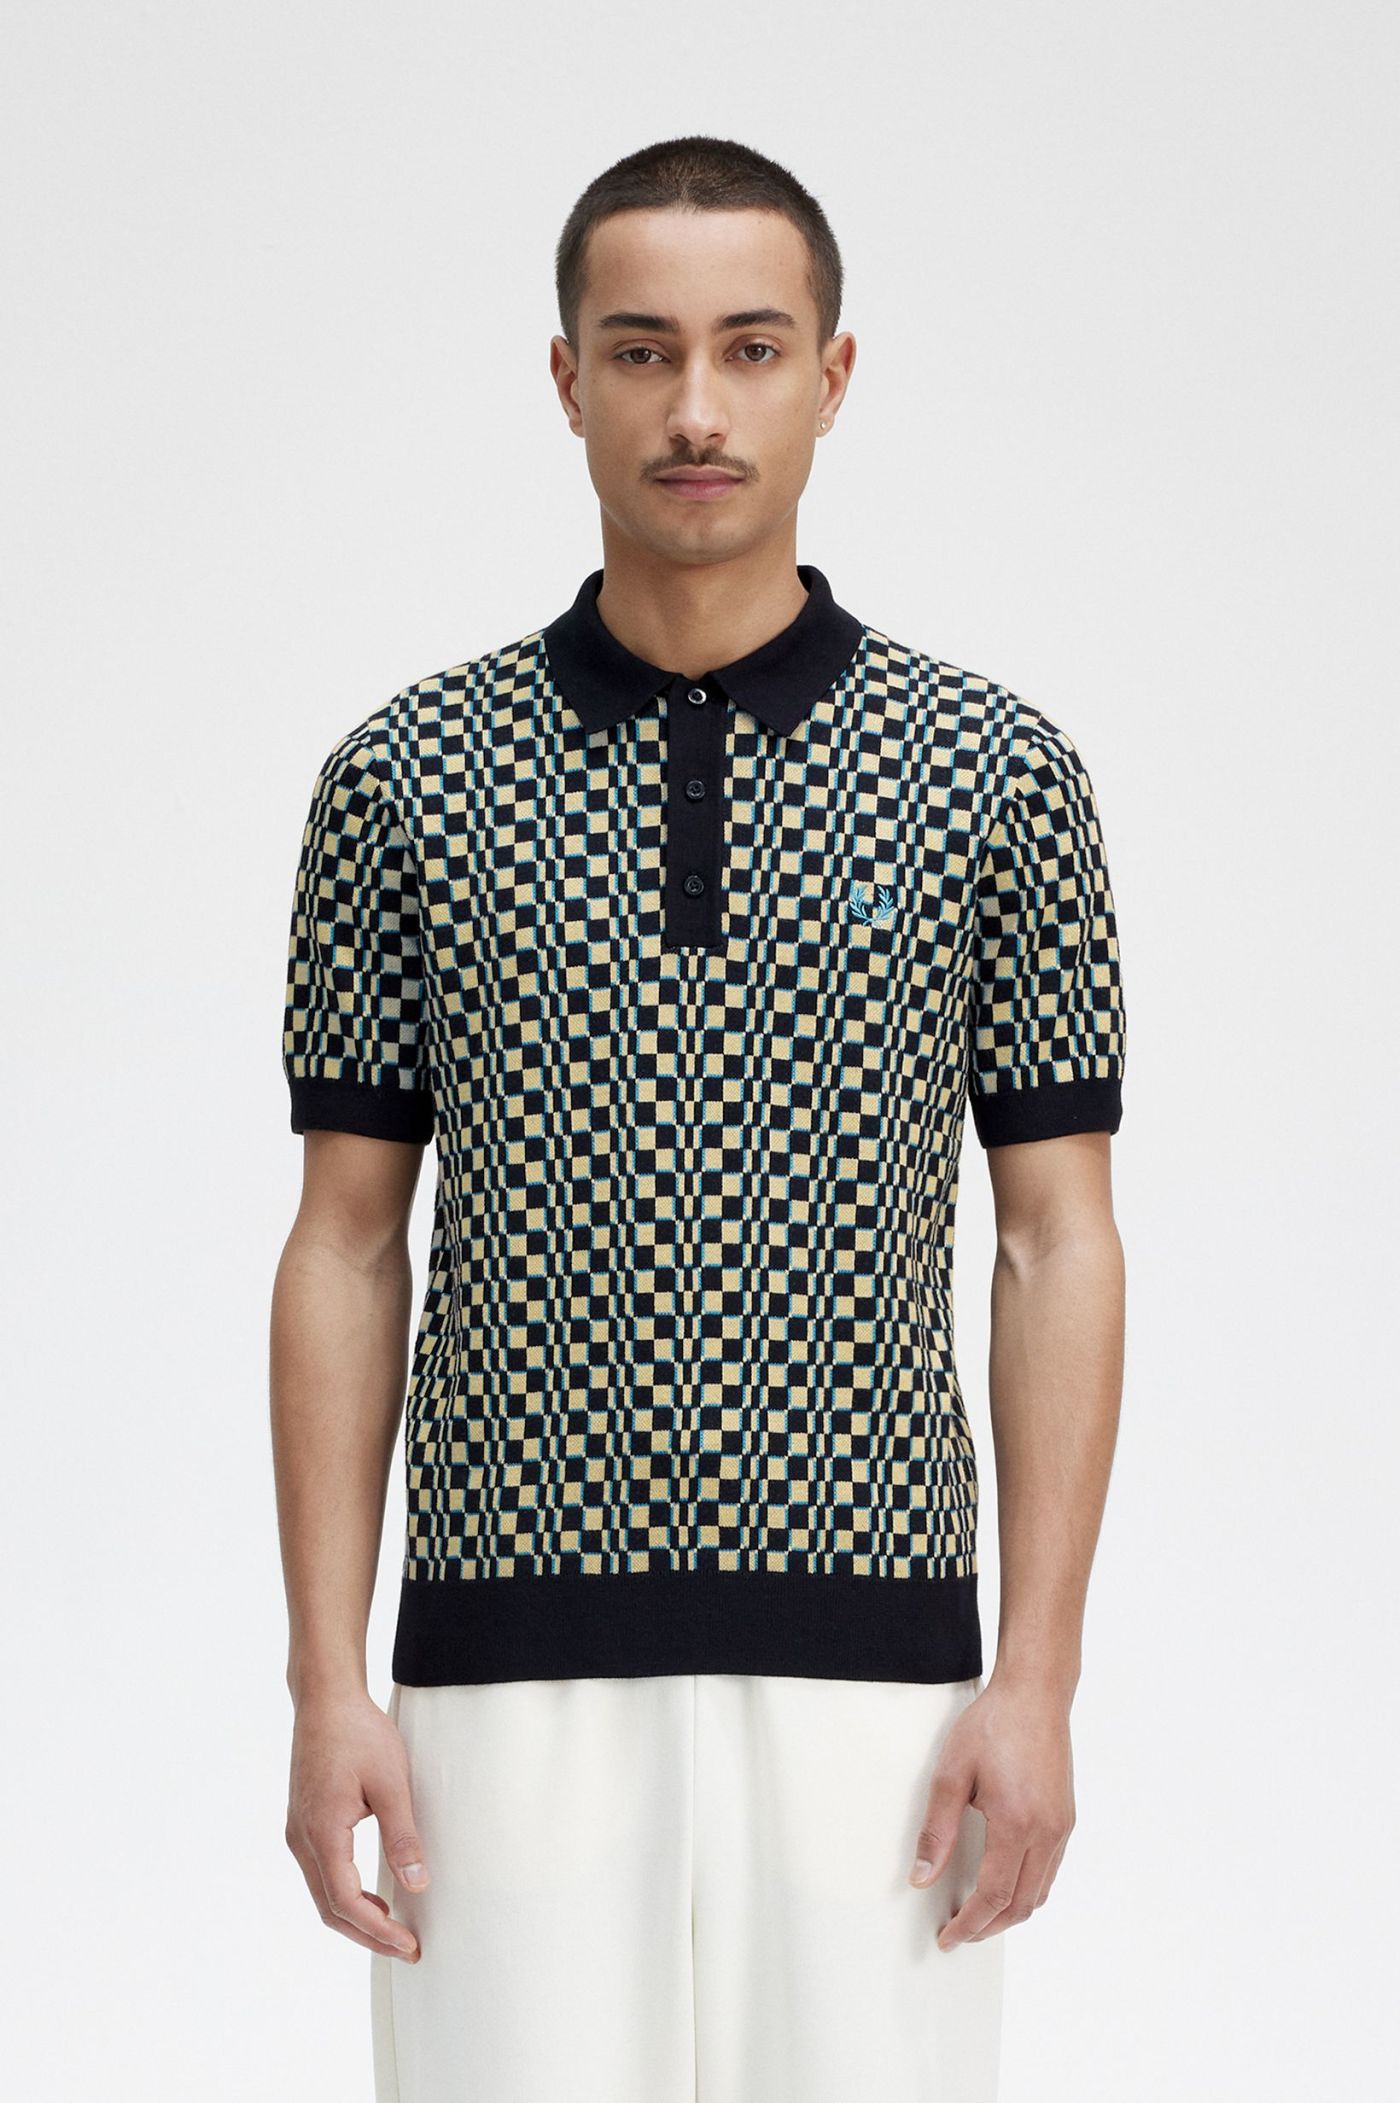 Glitch Chequerboard Knitted Shirt - Light Oyster / Black | Men's